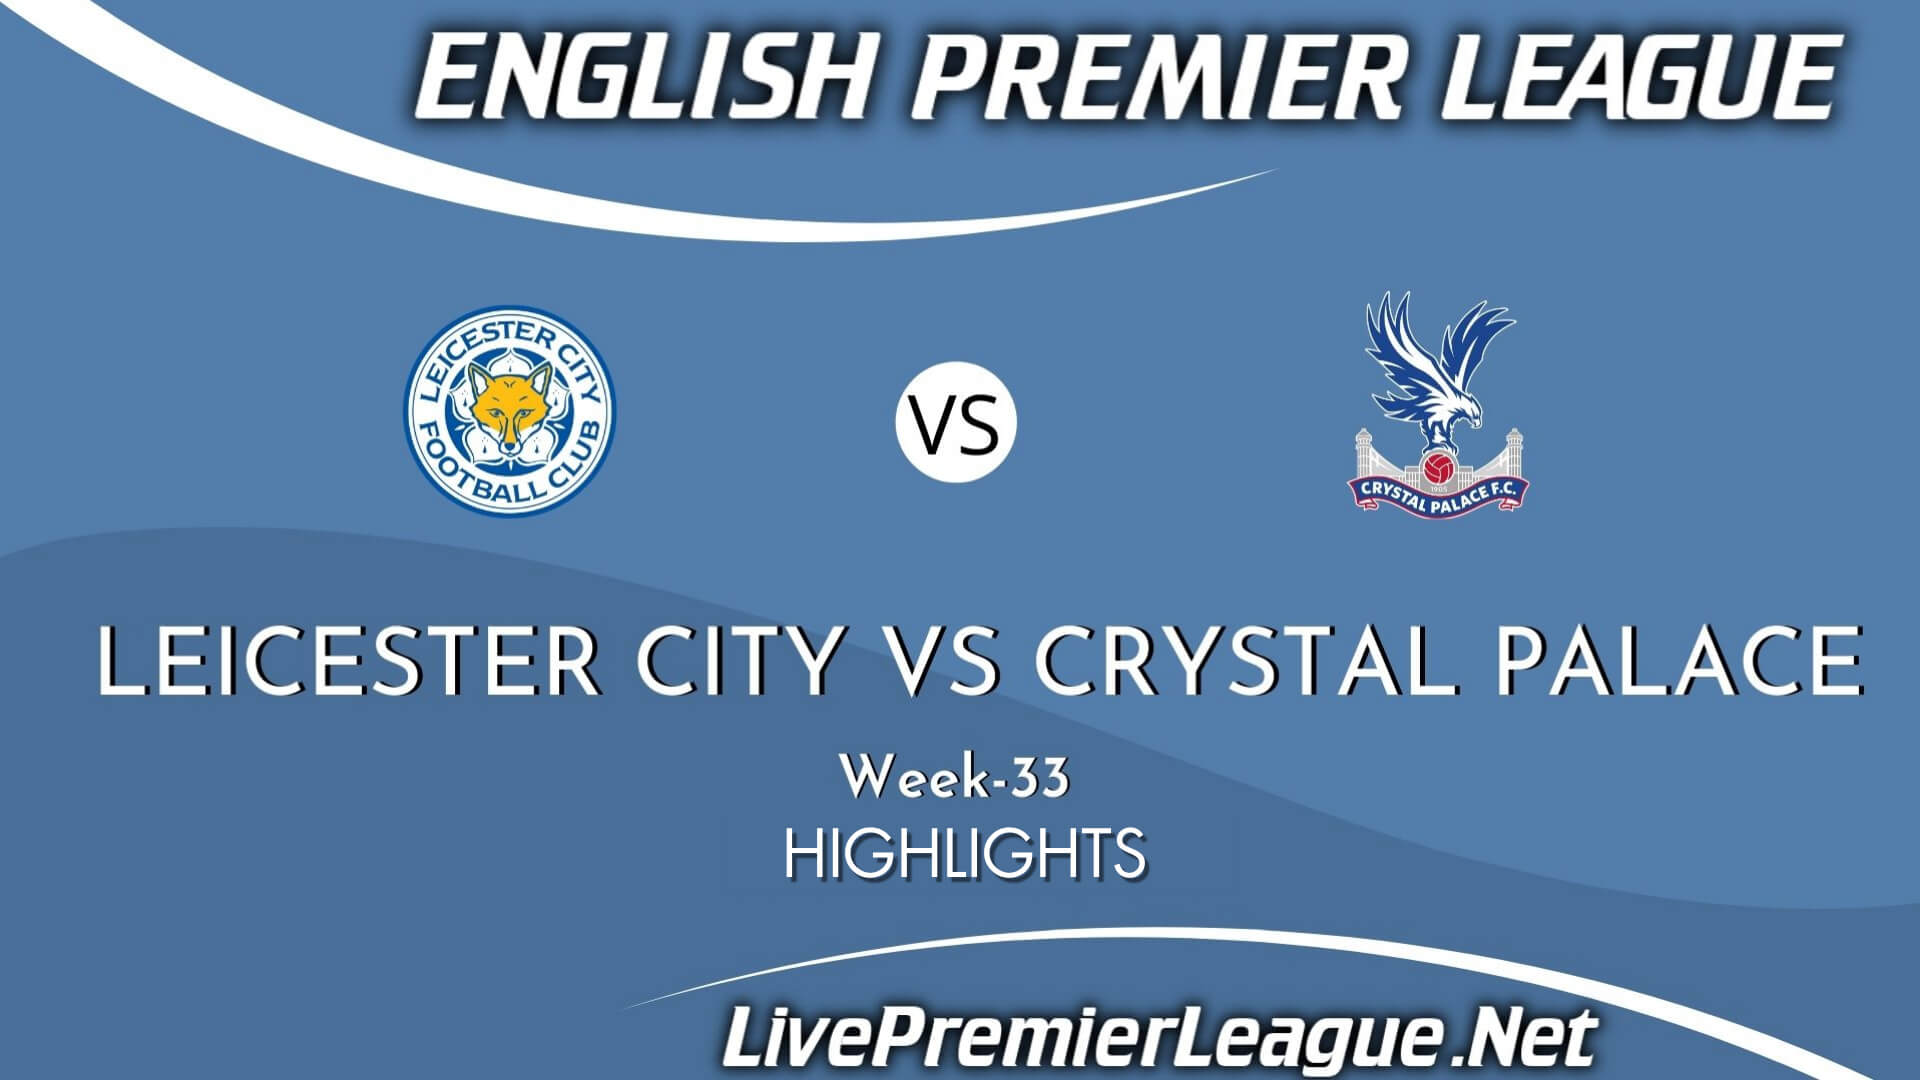 Leicester City Vs Crystal Palace Highlights 2021 Week 33